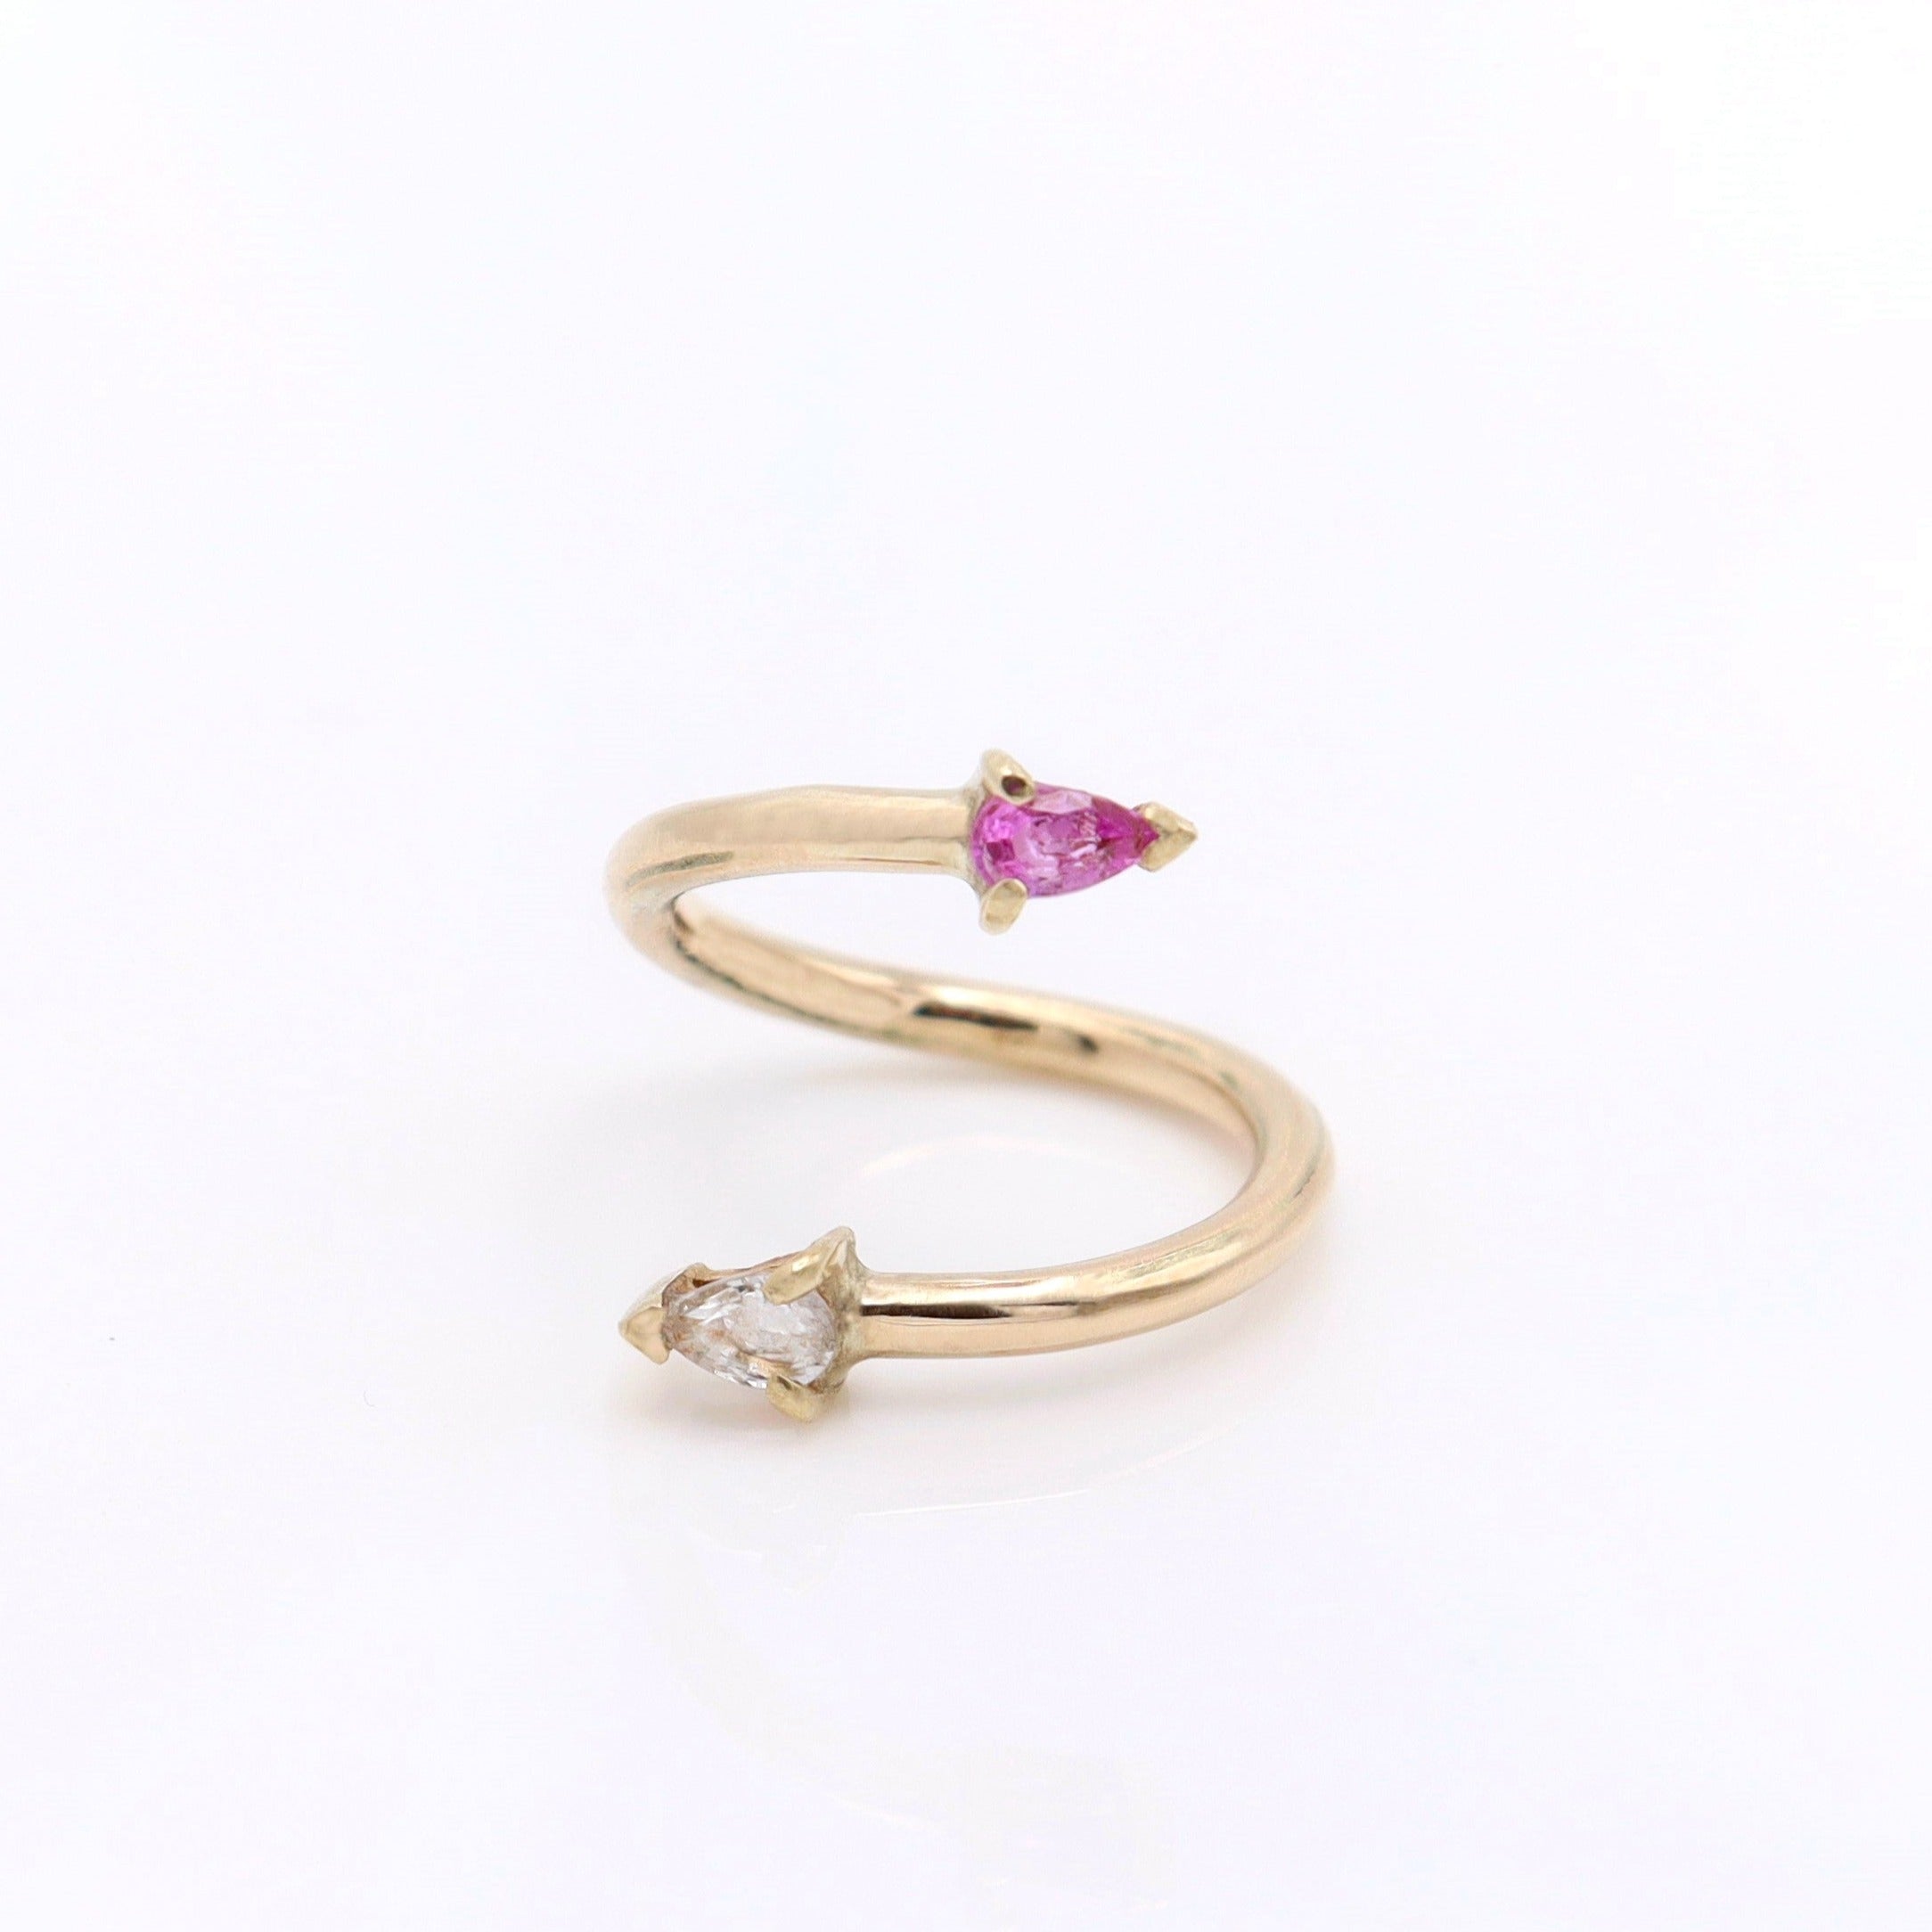 PINK AND WHITE SAPPHIRE WRAP RING